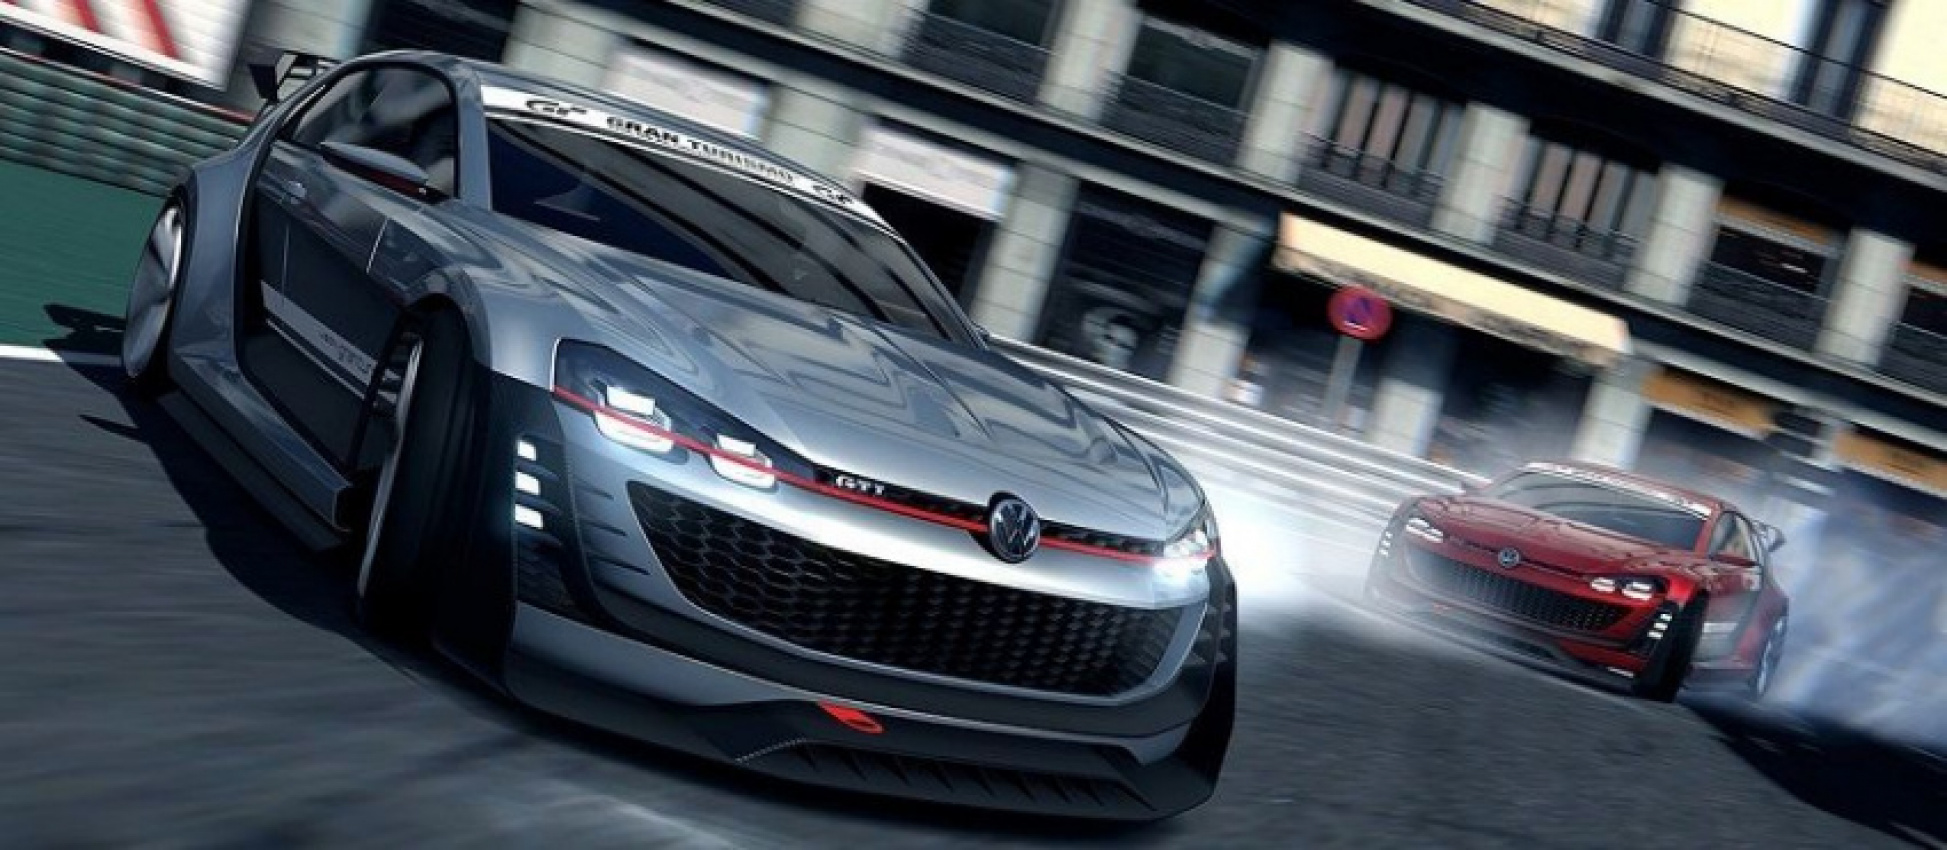 autos, cars, reviews, volkswagen, gran turismo, insights, playstation, video game, vision gt, volkswagen's gti supersport goes live on gran turismo 6